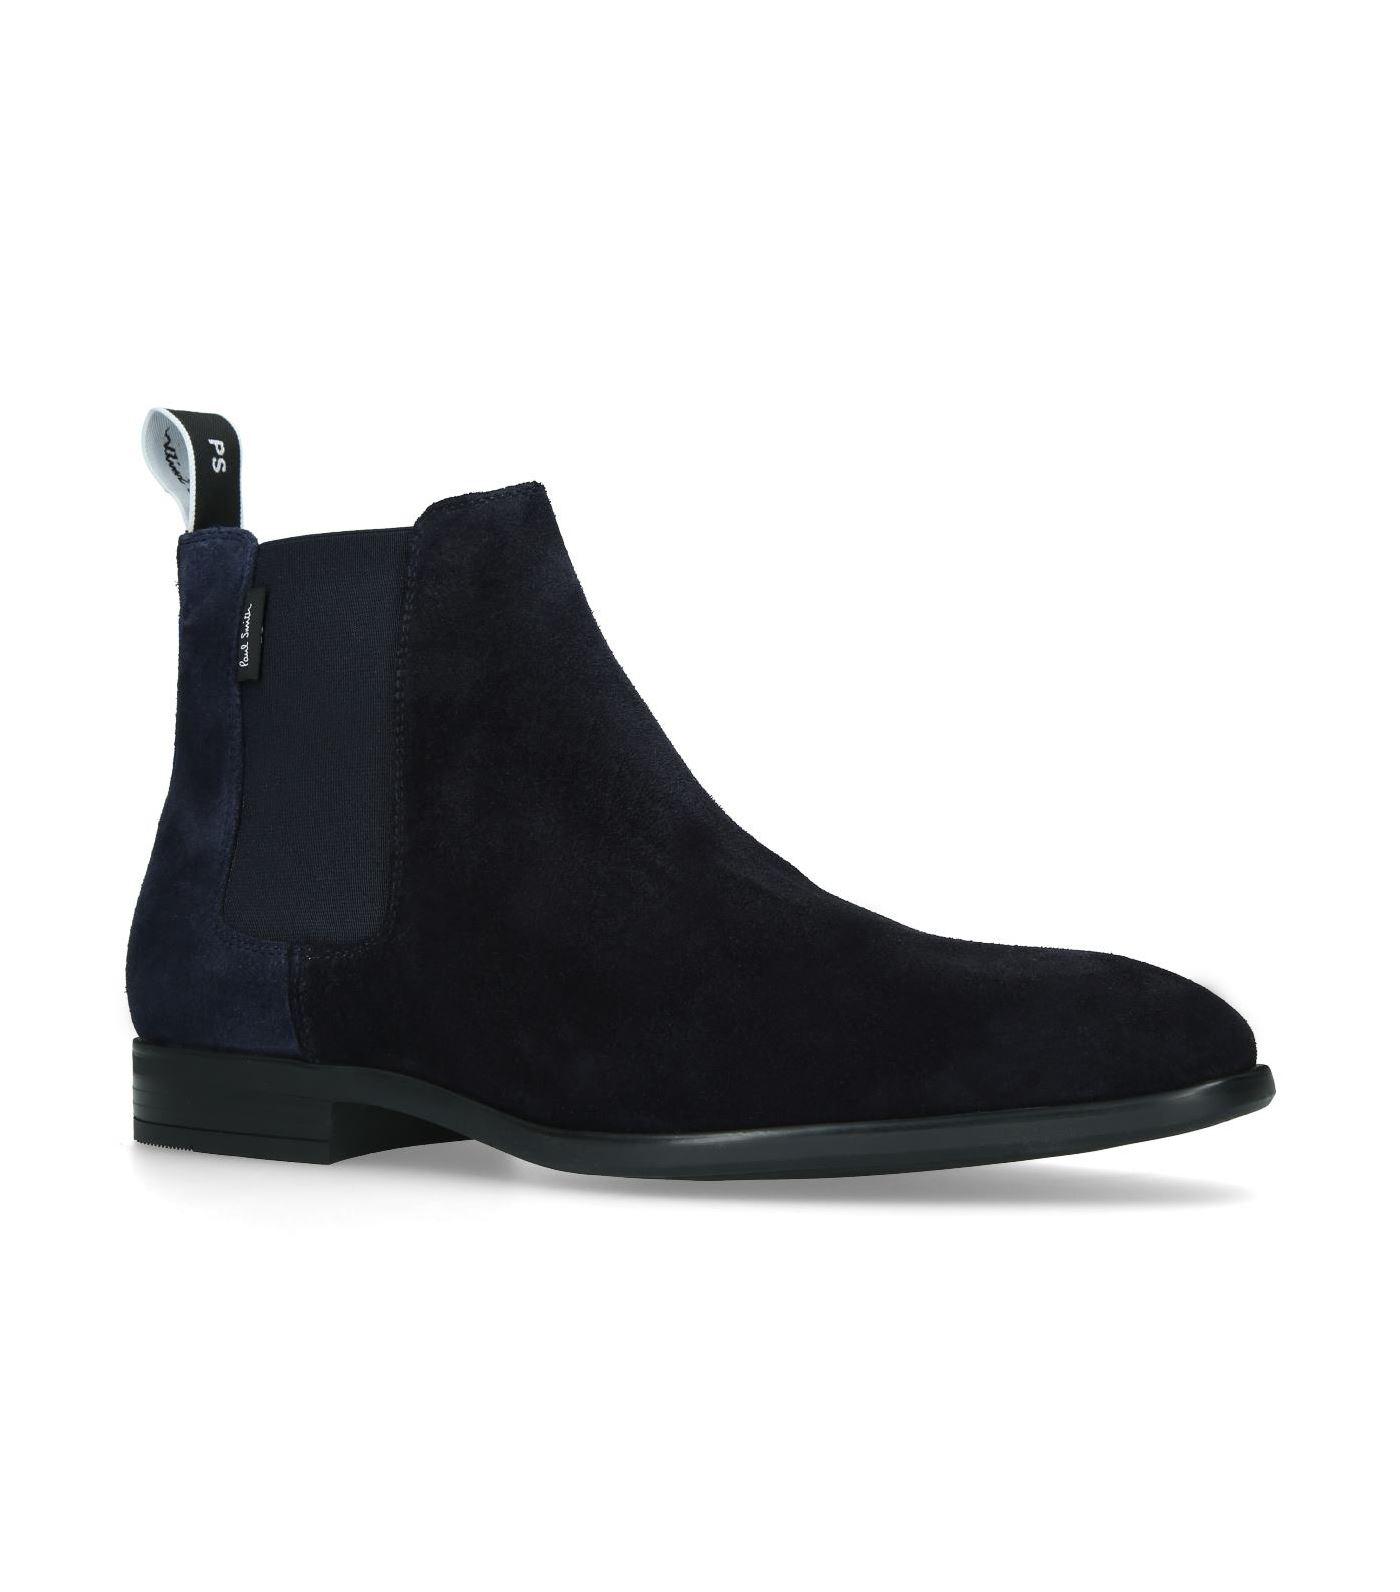 Paul Smith Suede Gerald Chelsea Boots in Blue for Men - Lyst